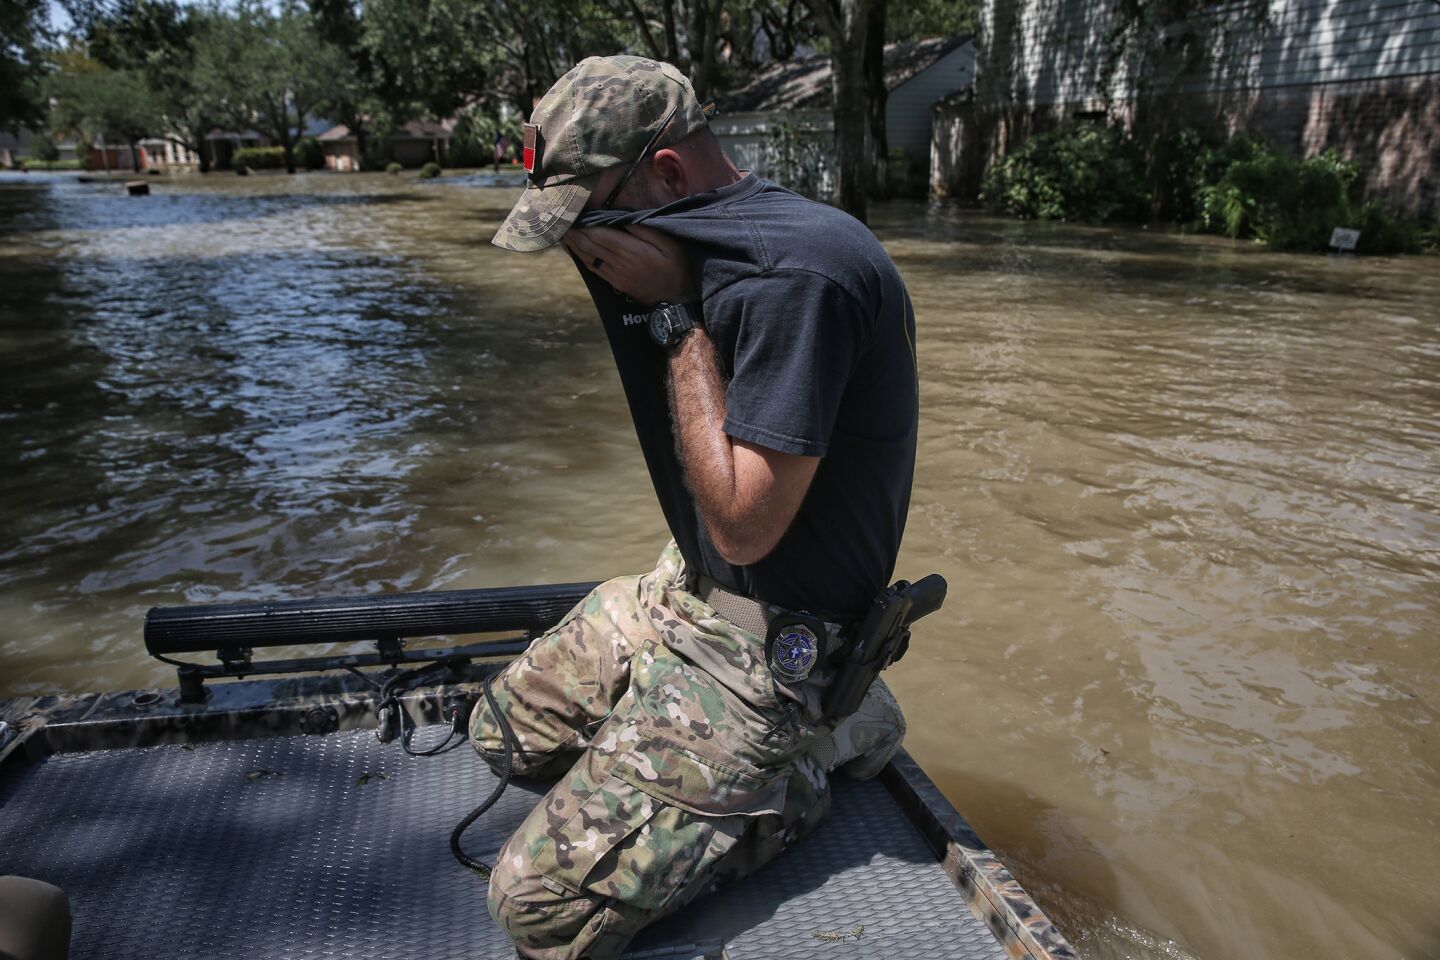 Wes Higgins wipes sweat from his face after spending five days patrolling flooded Houston neighborhoods in his boat. Higgins, from Knott, Texas, organized a volunteer team of 10 boats to help Houston residents.